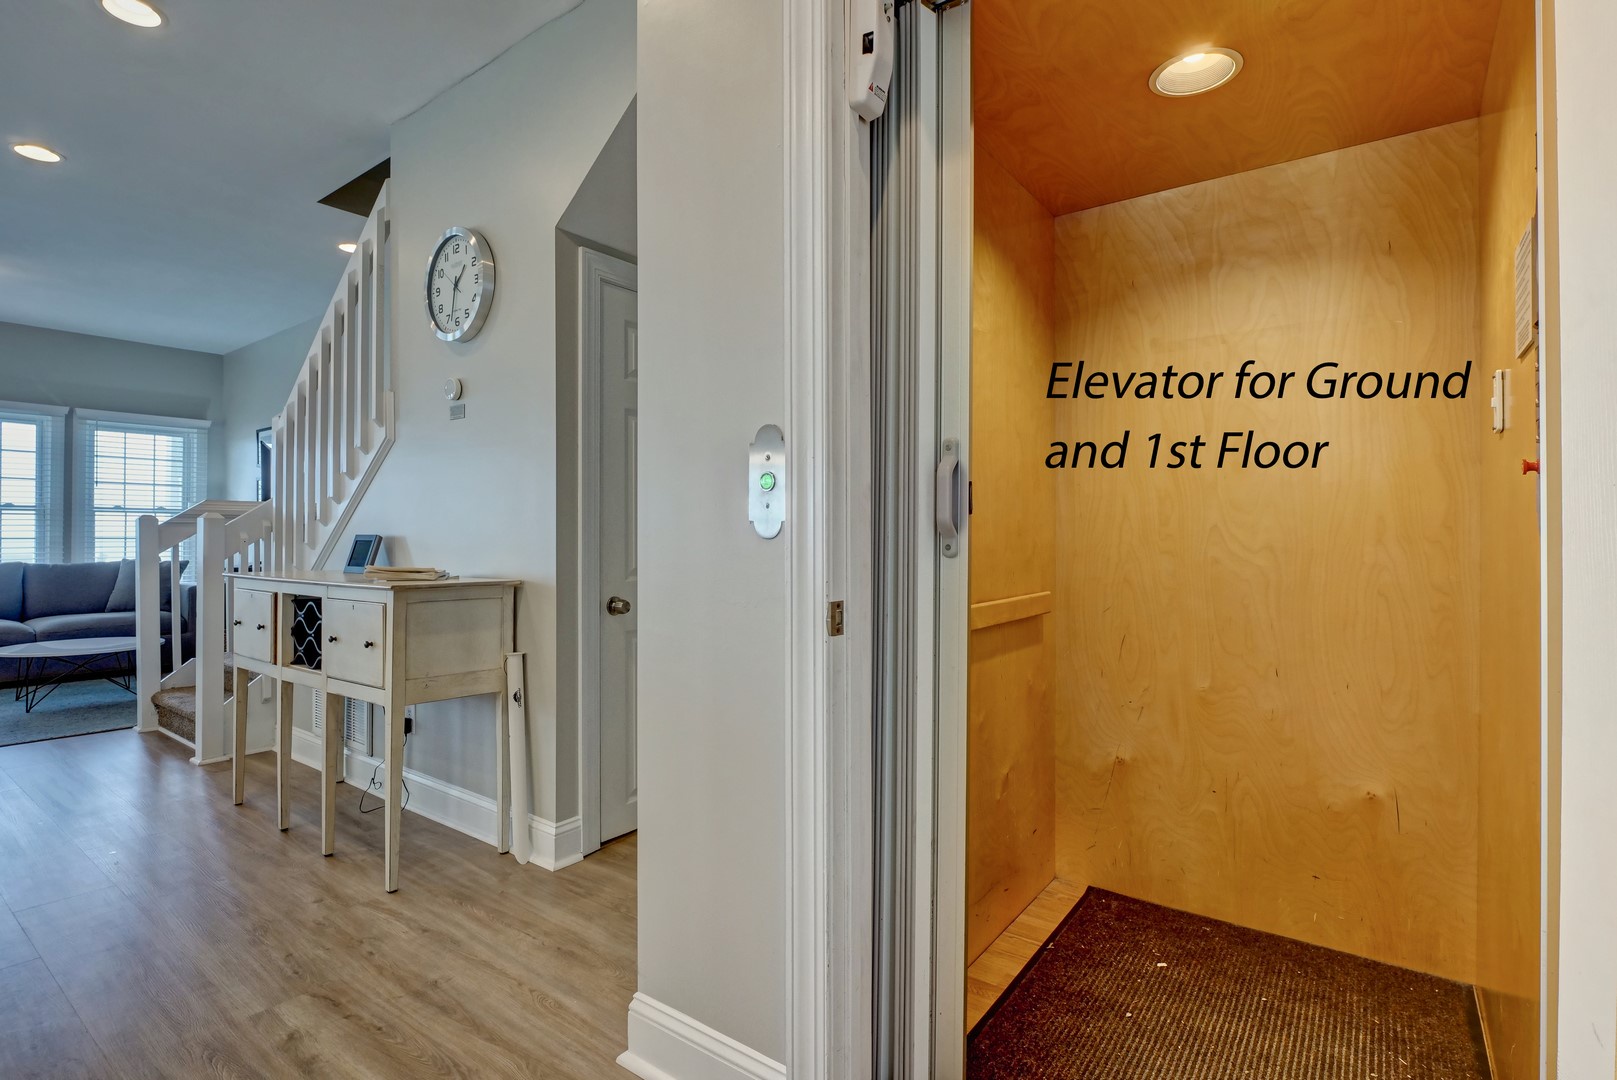 Elevator - Accesses Ground Floor to 1st Floor Only